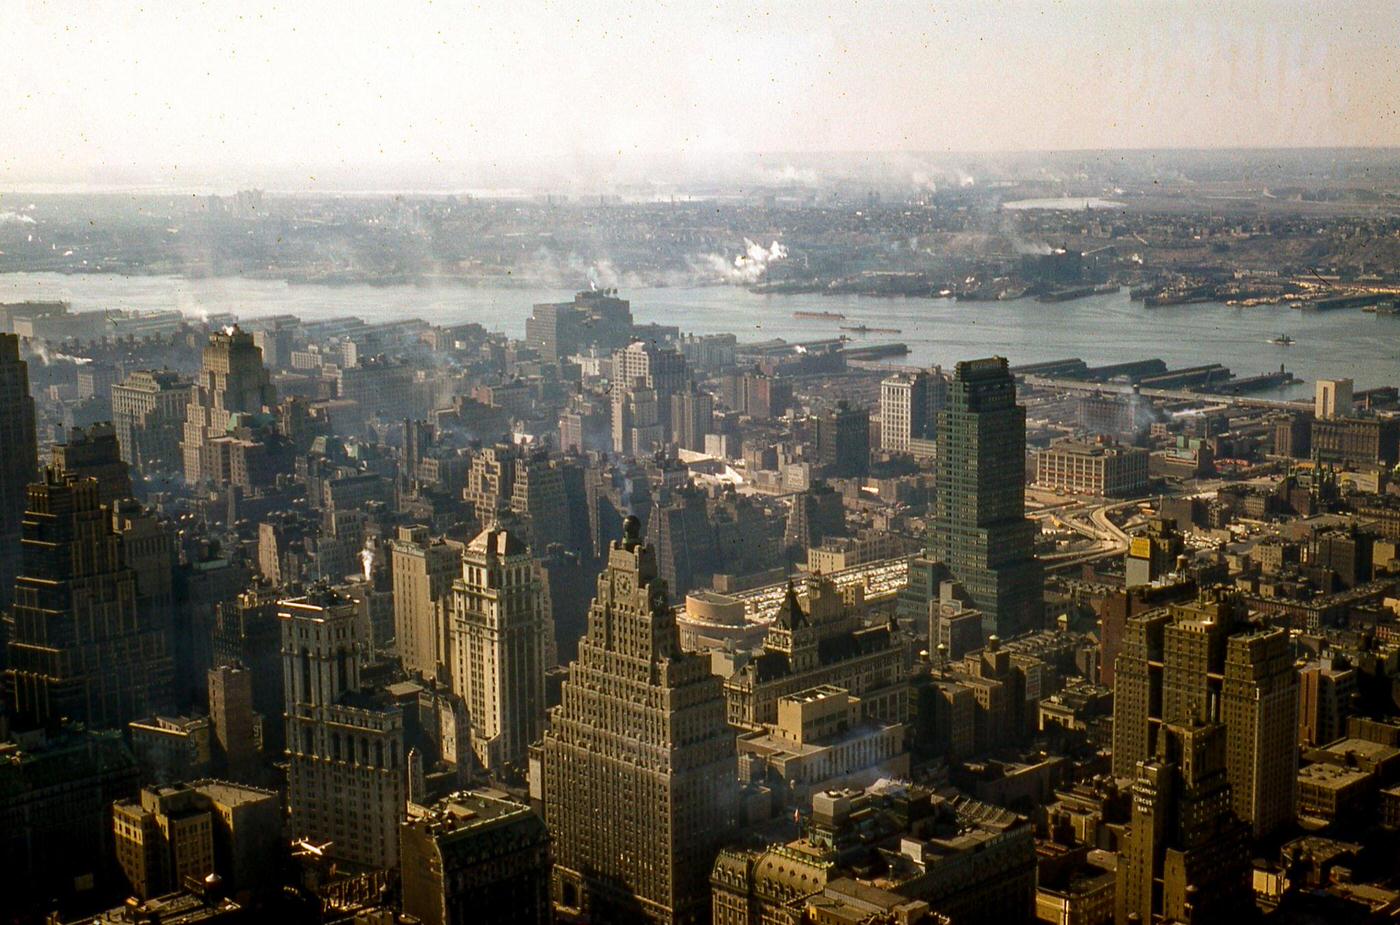 Panoramic View Of Times Square, Hells Kitchen, Chelsea, West Side Of Manhattan, 1957.